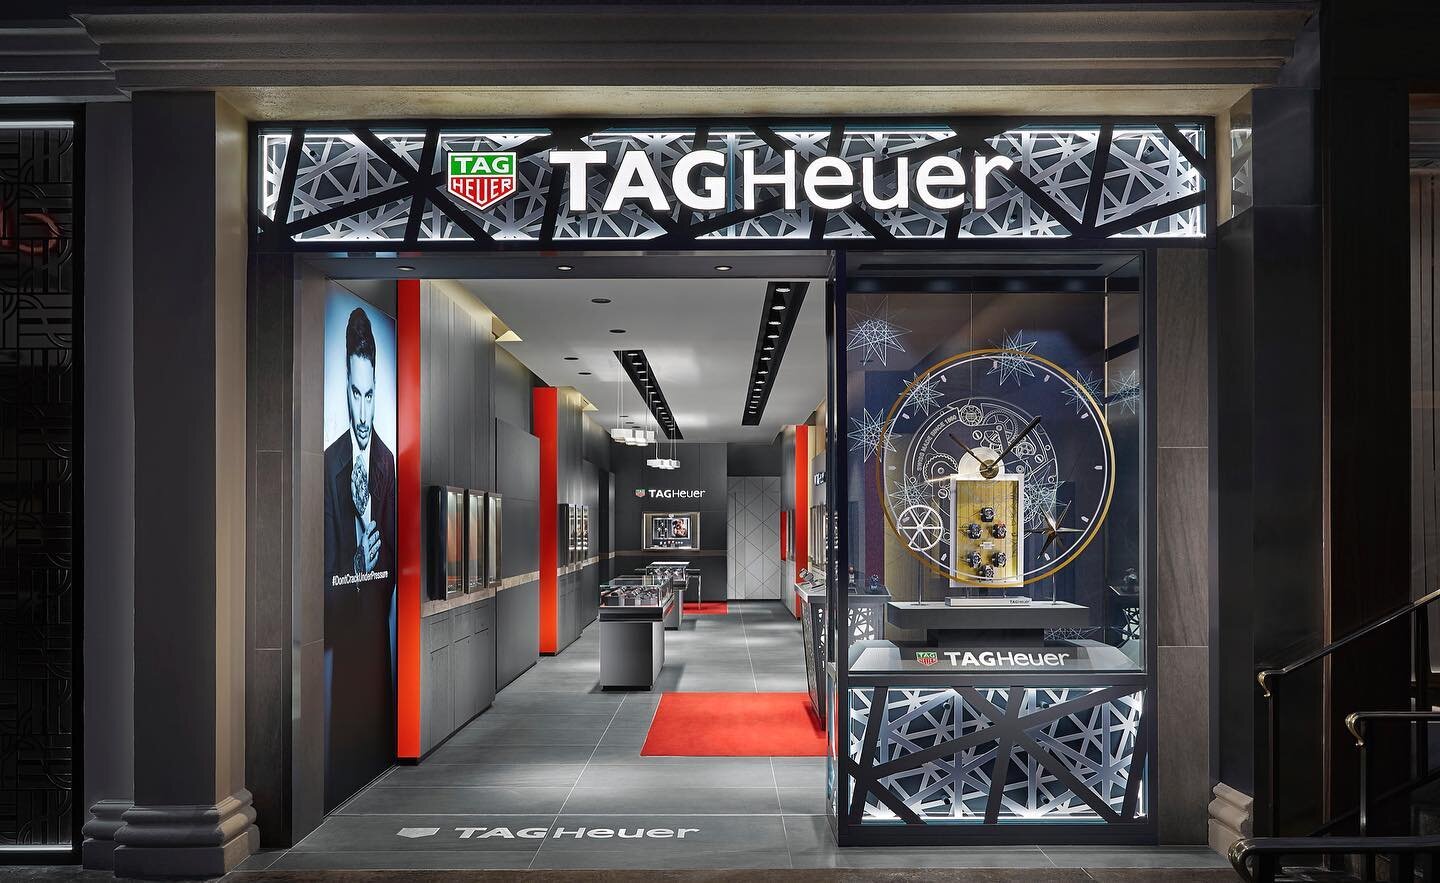 High-end photography for high-end brands. Here's a set of architectural images that we took for @tagheuer luxury watch boutique at @theforumshops in Caesar's Palace. Photoshoot art direction by Stephen Mallari. Interior design by @exhibithappy. Locat